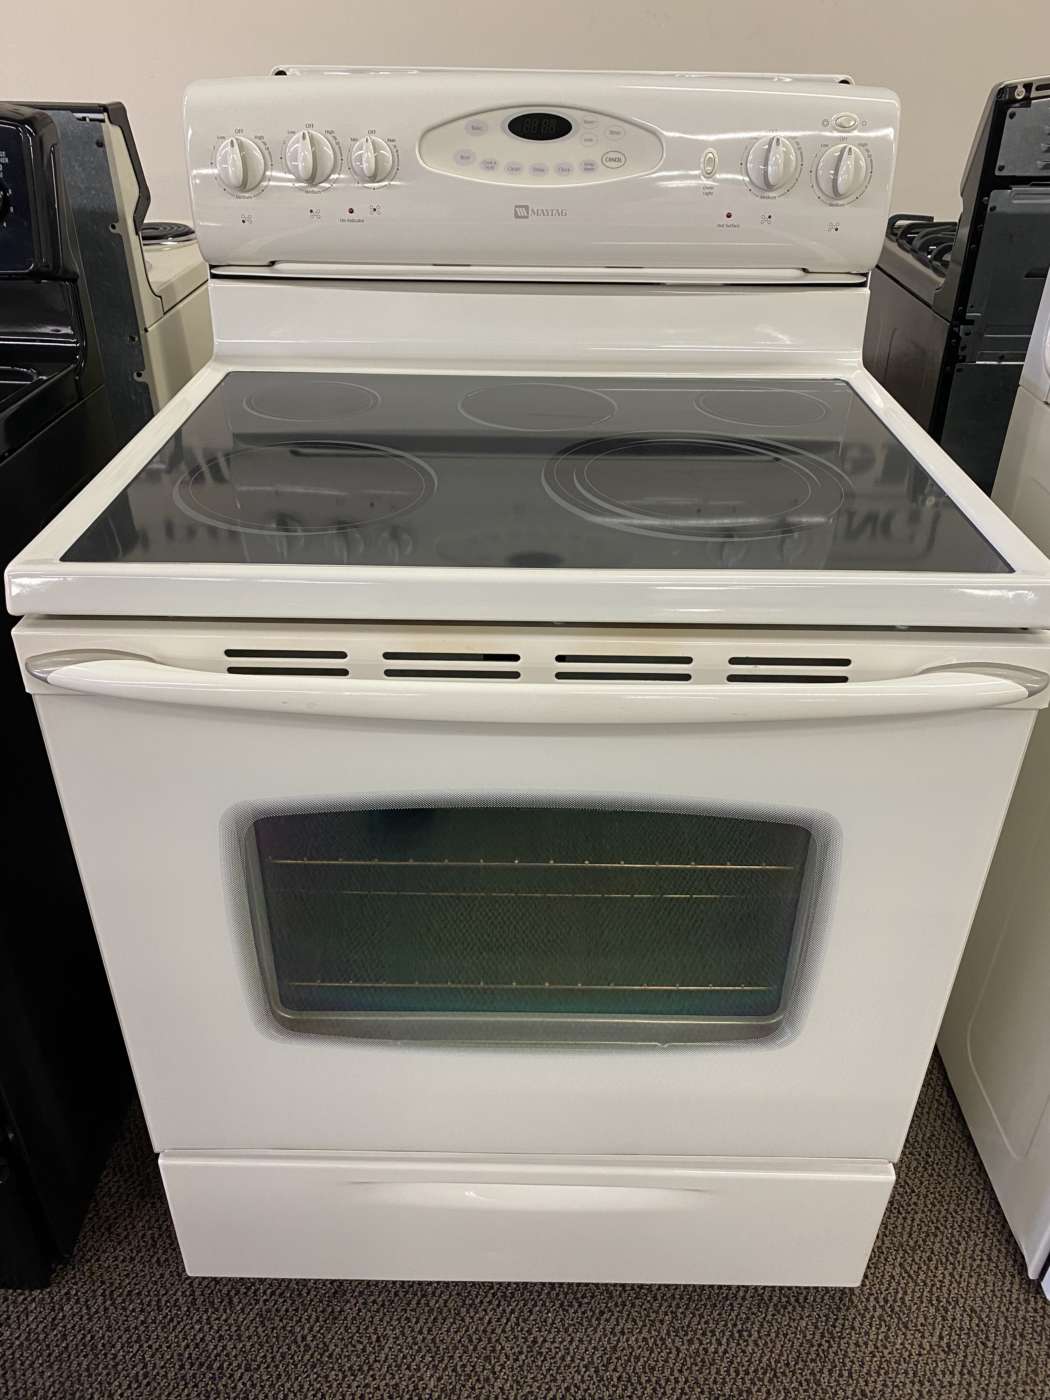 Reconditioned MAYTAG Self-Clean Electric Range – Bisque